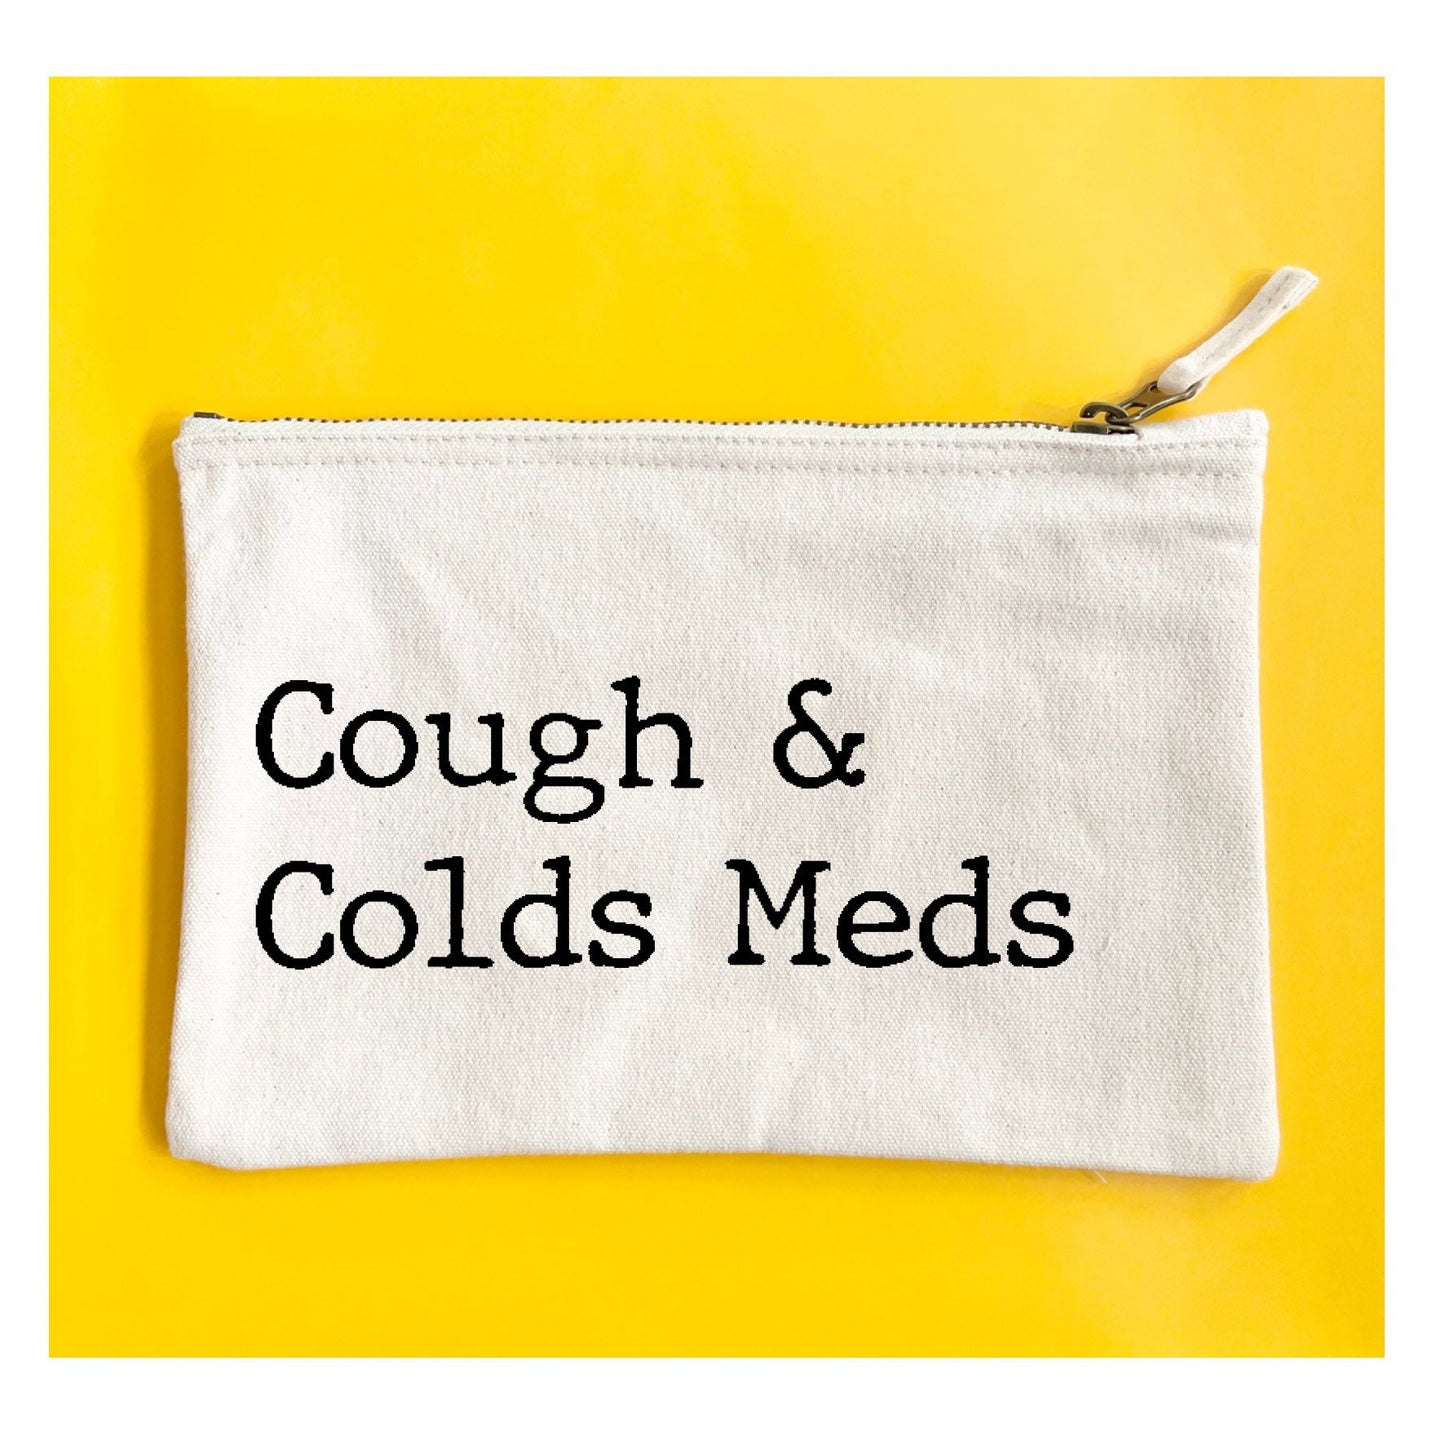 Cough and cold meds pouch to store all cold medications this winter. Christmas gift idea for organised mums